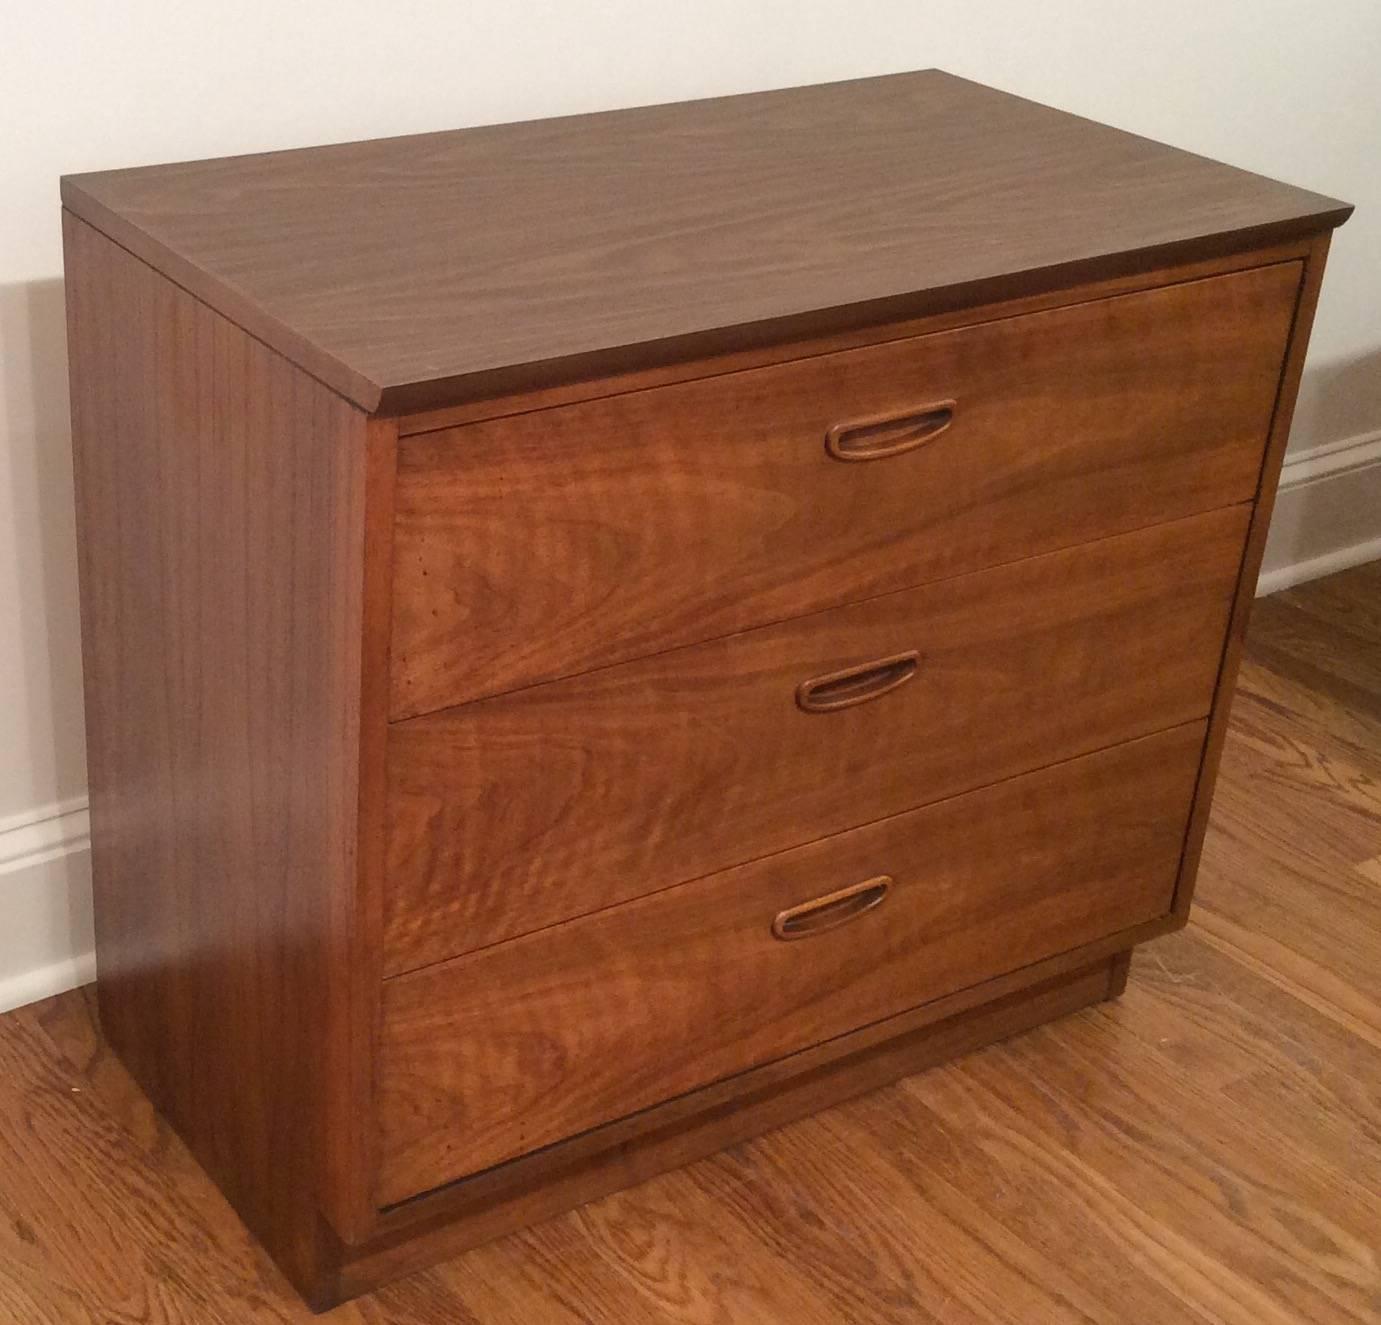 1960s three-drawer dresser by Lane. The dresser is a lovely walnut grain and the top is Formica. We have two available on our 1stdibs website. The drawer handles are recessed giving a modern appearance.